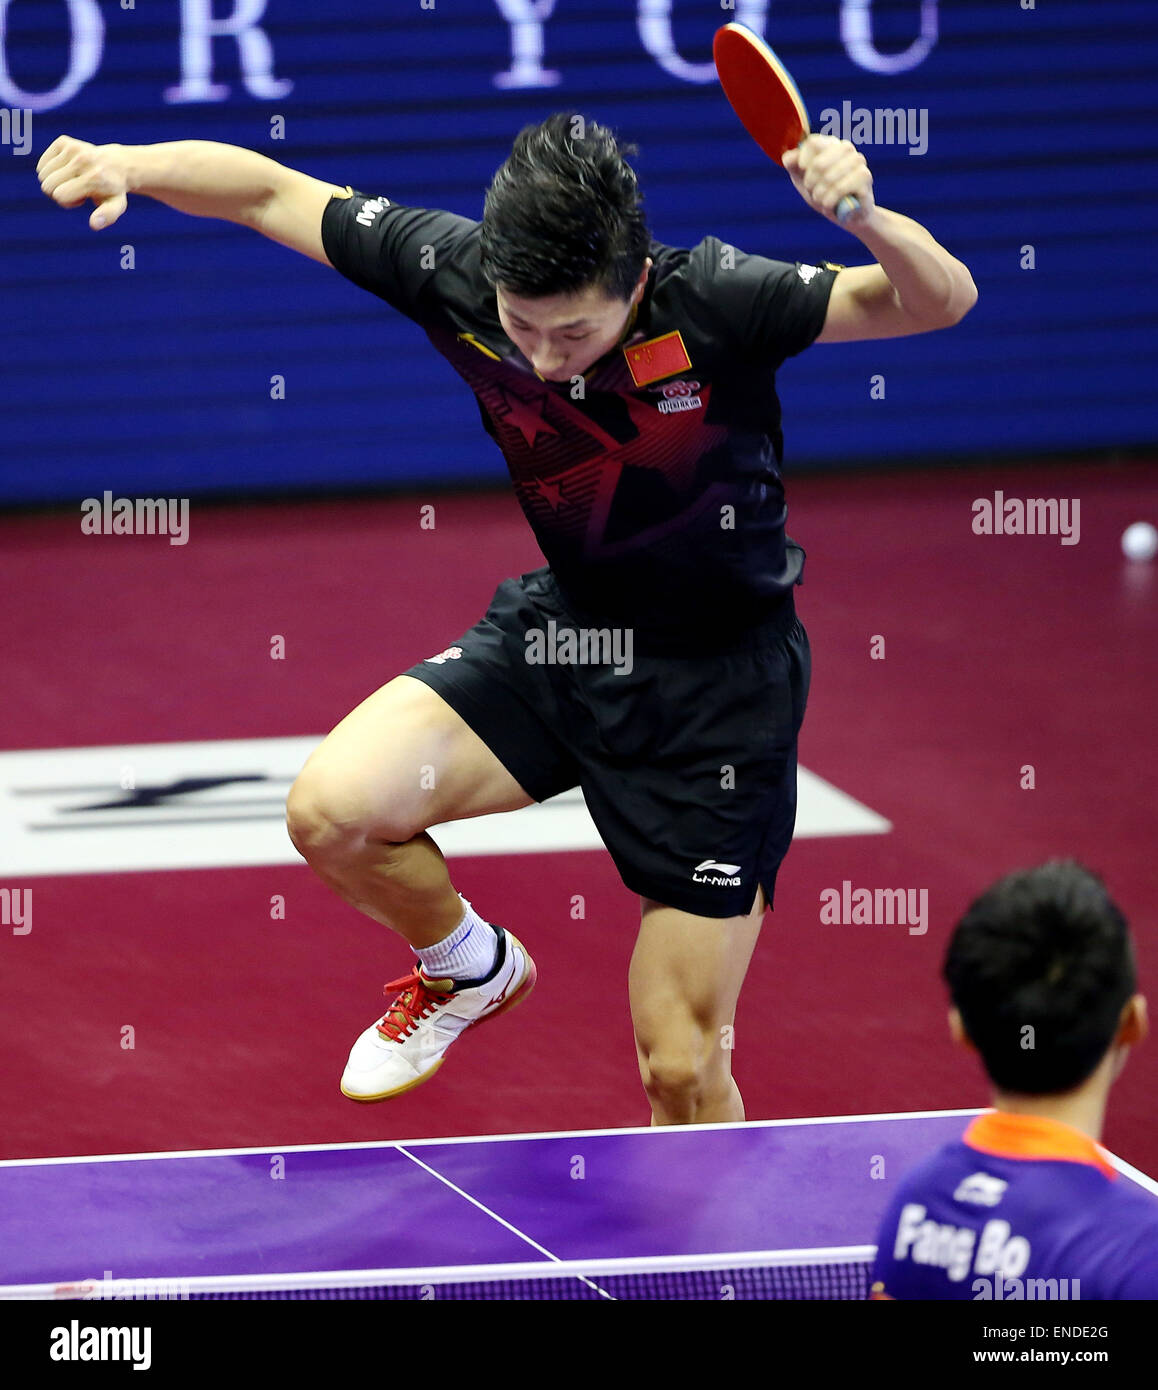 Suzhou, China's Jiangsu Province. 3rd May, 2015. China's Ma Long jump onto the table to celebrate the victory after Men's Singles Final against his compatriot Fang Bo at the 53rd Table Tennis World Championships in Suzhou, city of east China's Jiangsu Province, on May 3, 2015. Ma Long won 4-2 and claimed the title. Credit:  Yang Shiyao/Xinhua/Alamy Live News Stock Photo